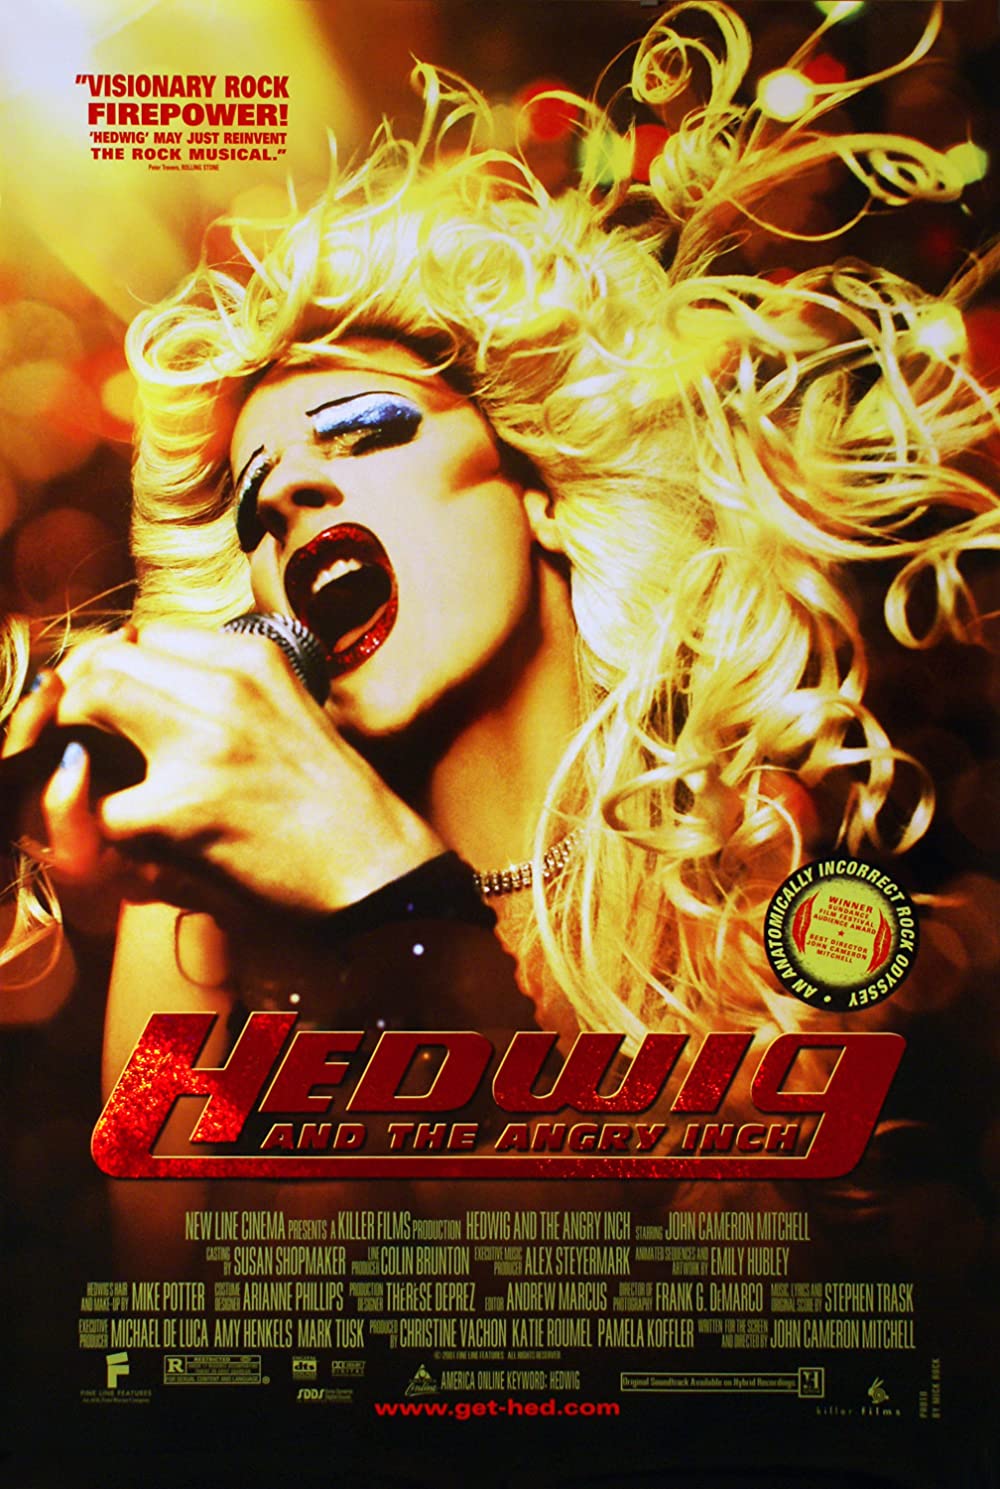 Filmbeschreibung zu Hedwig and the Angry Inch